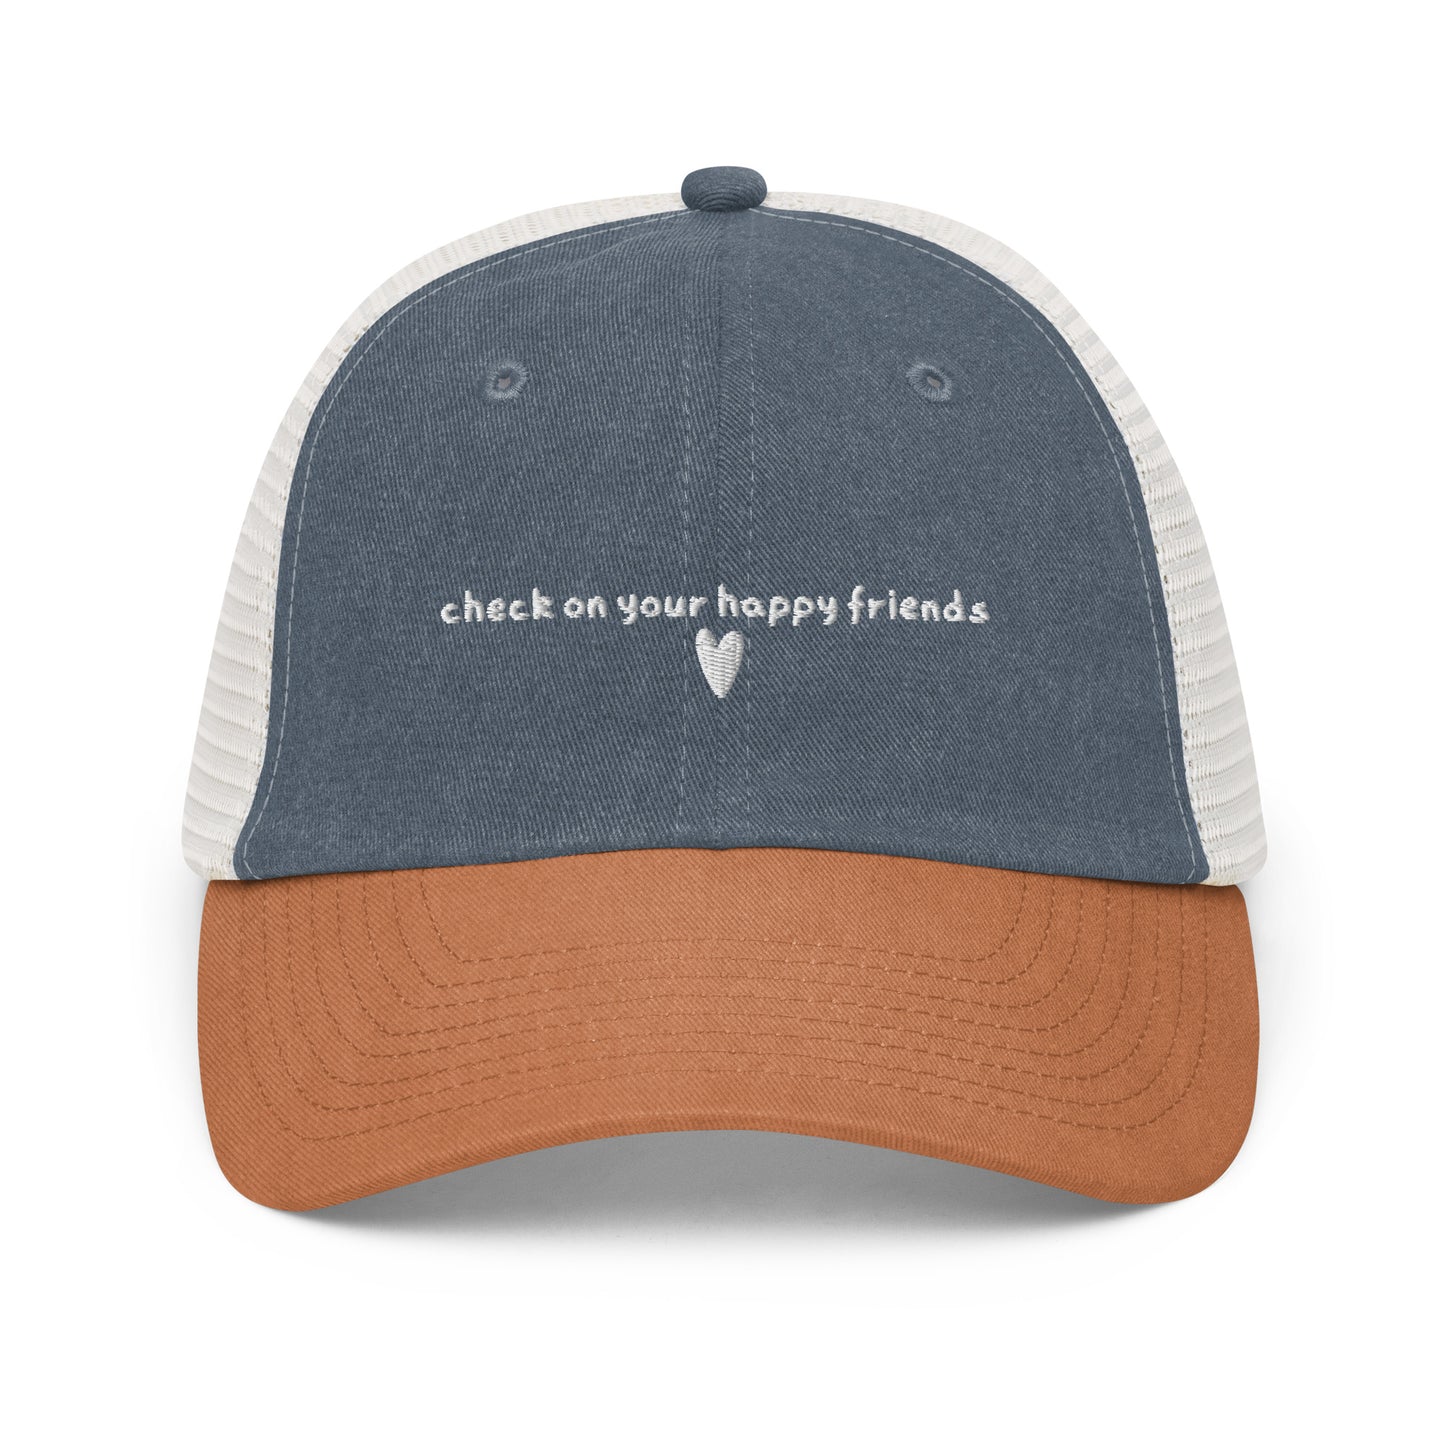 Embroidered 'check on your happy friends' Vintage Baseball Cap